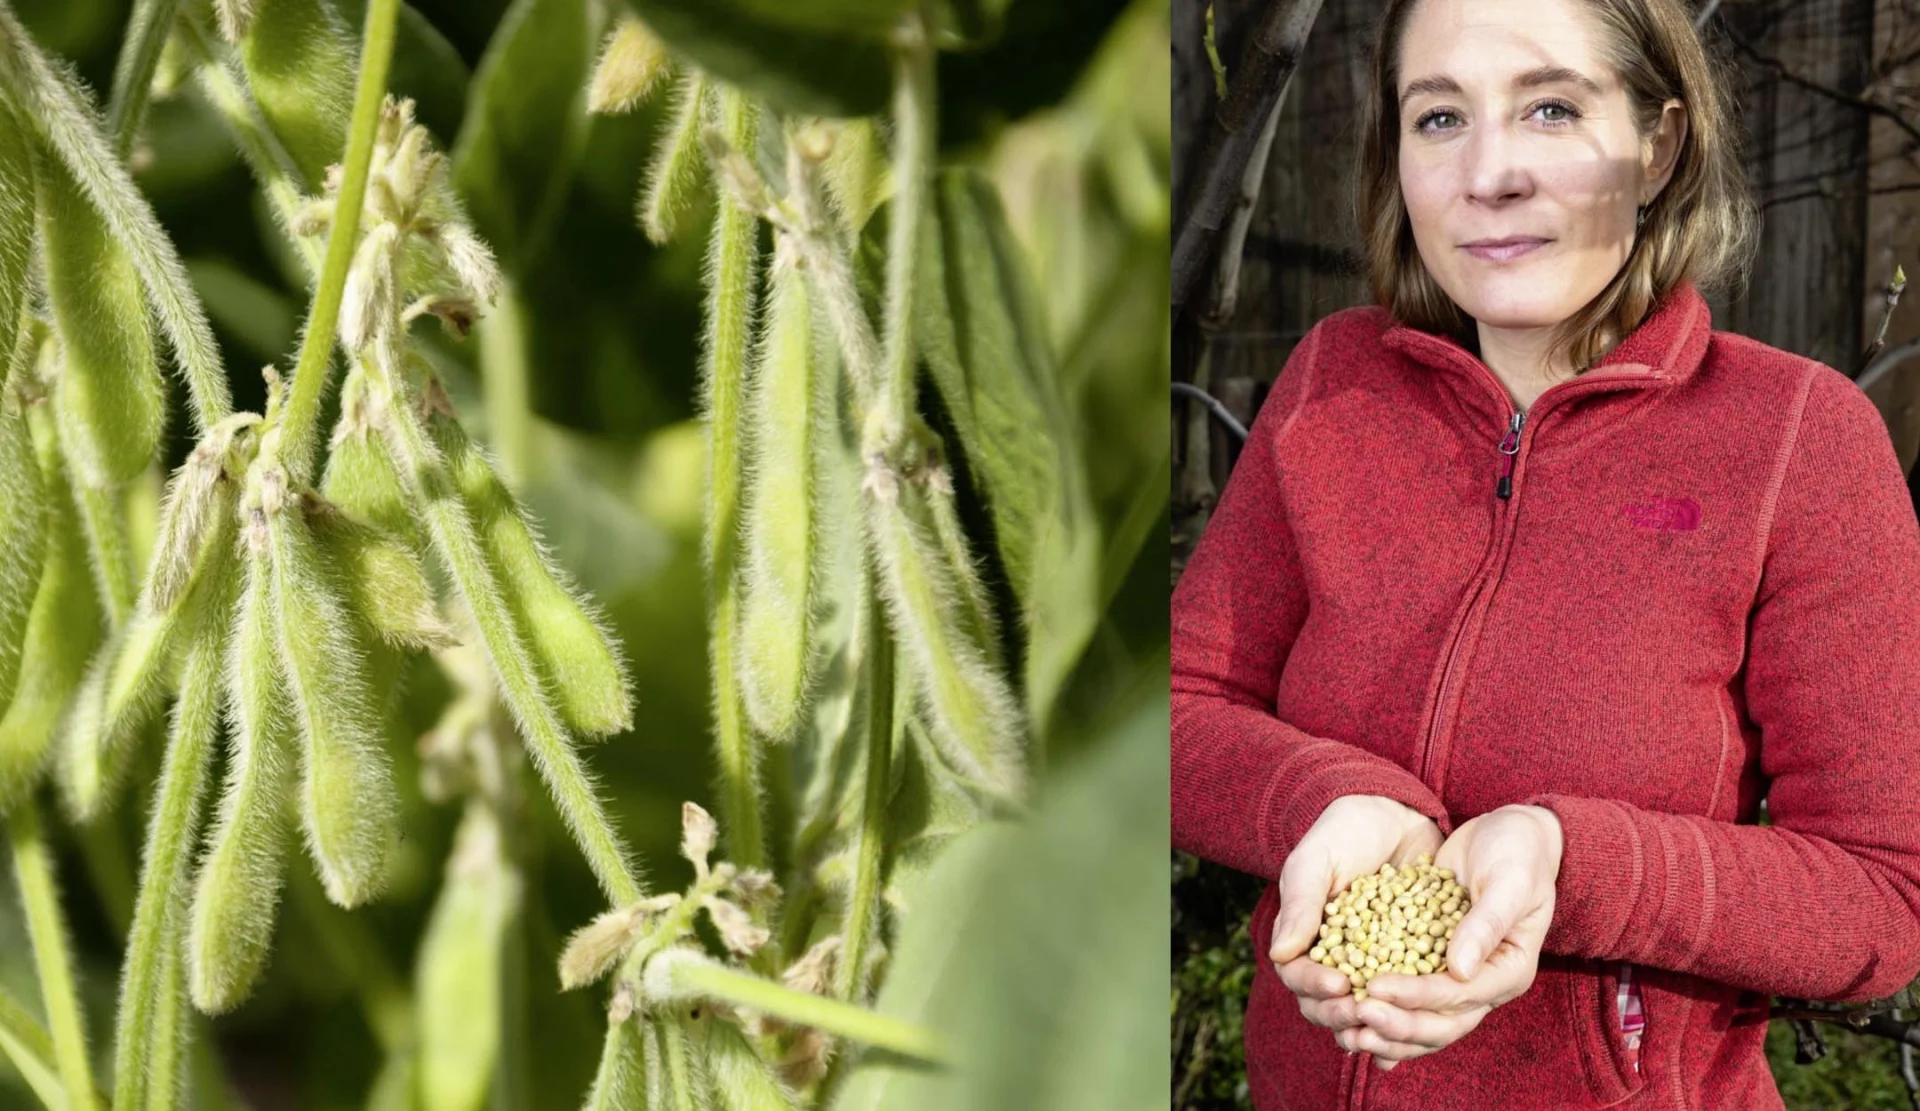 Farmer Dominique Kramer shows the beans that have grown on her farm.